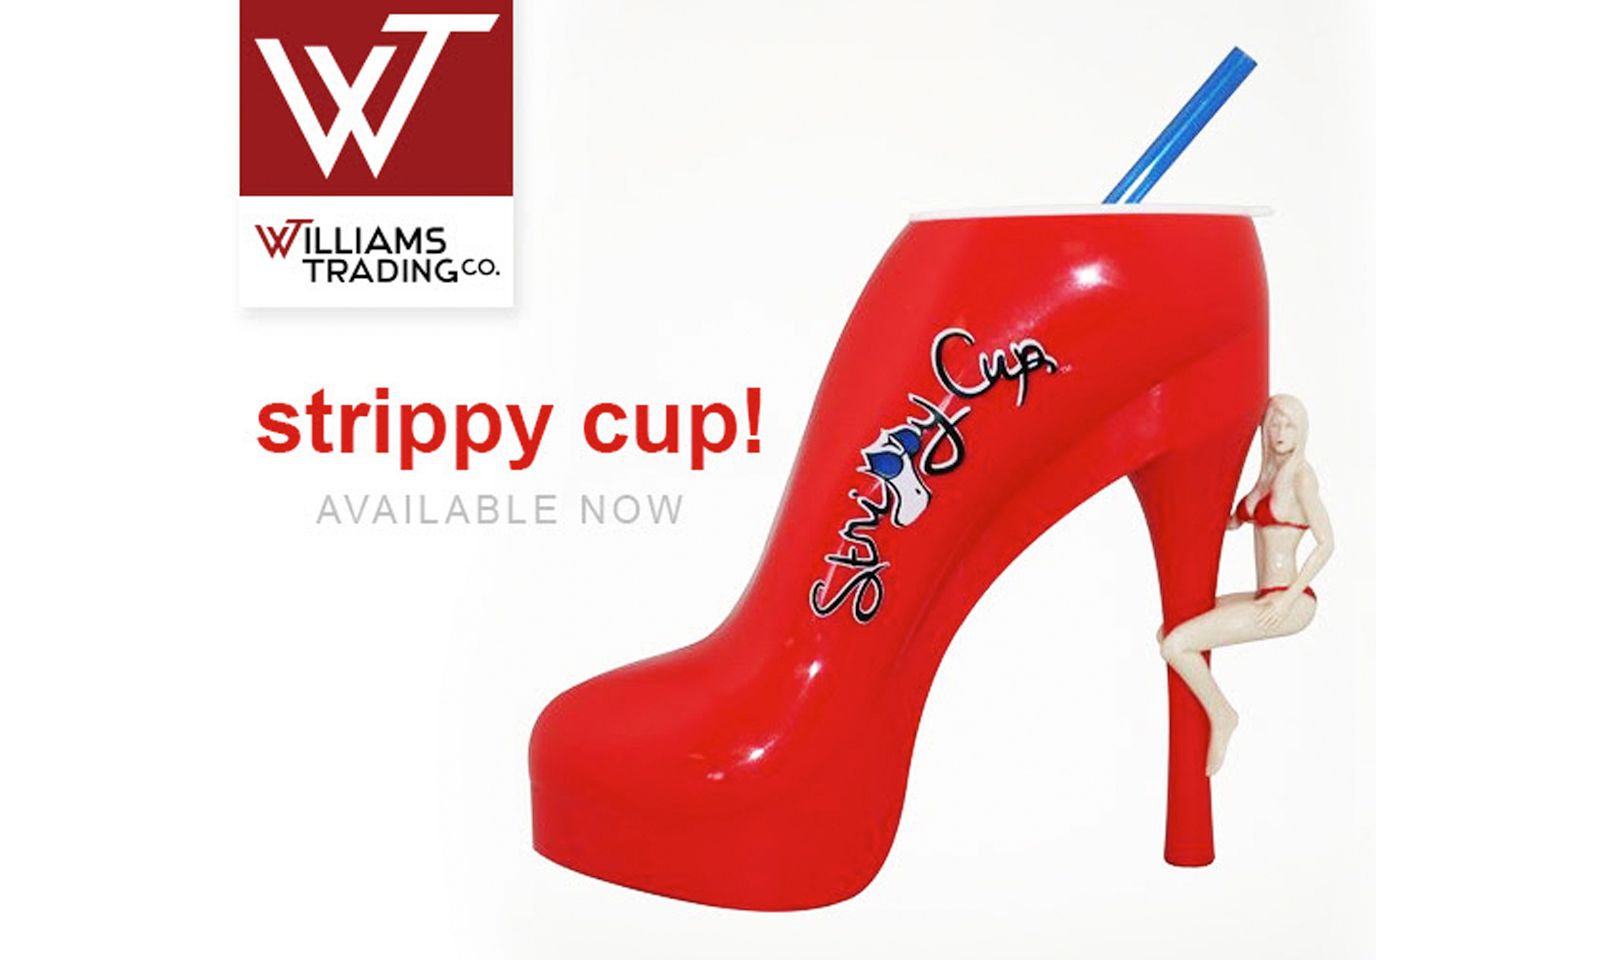 Williams Trading Exclusively Distributing Strippy Cup